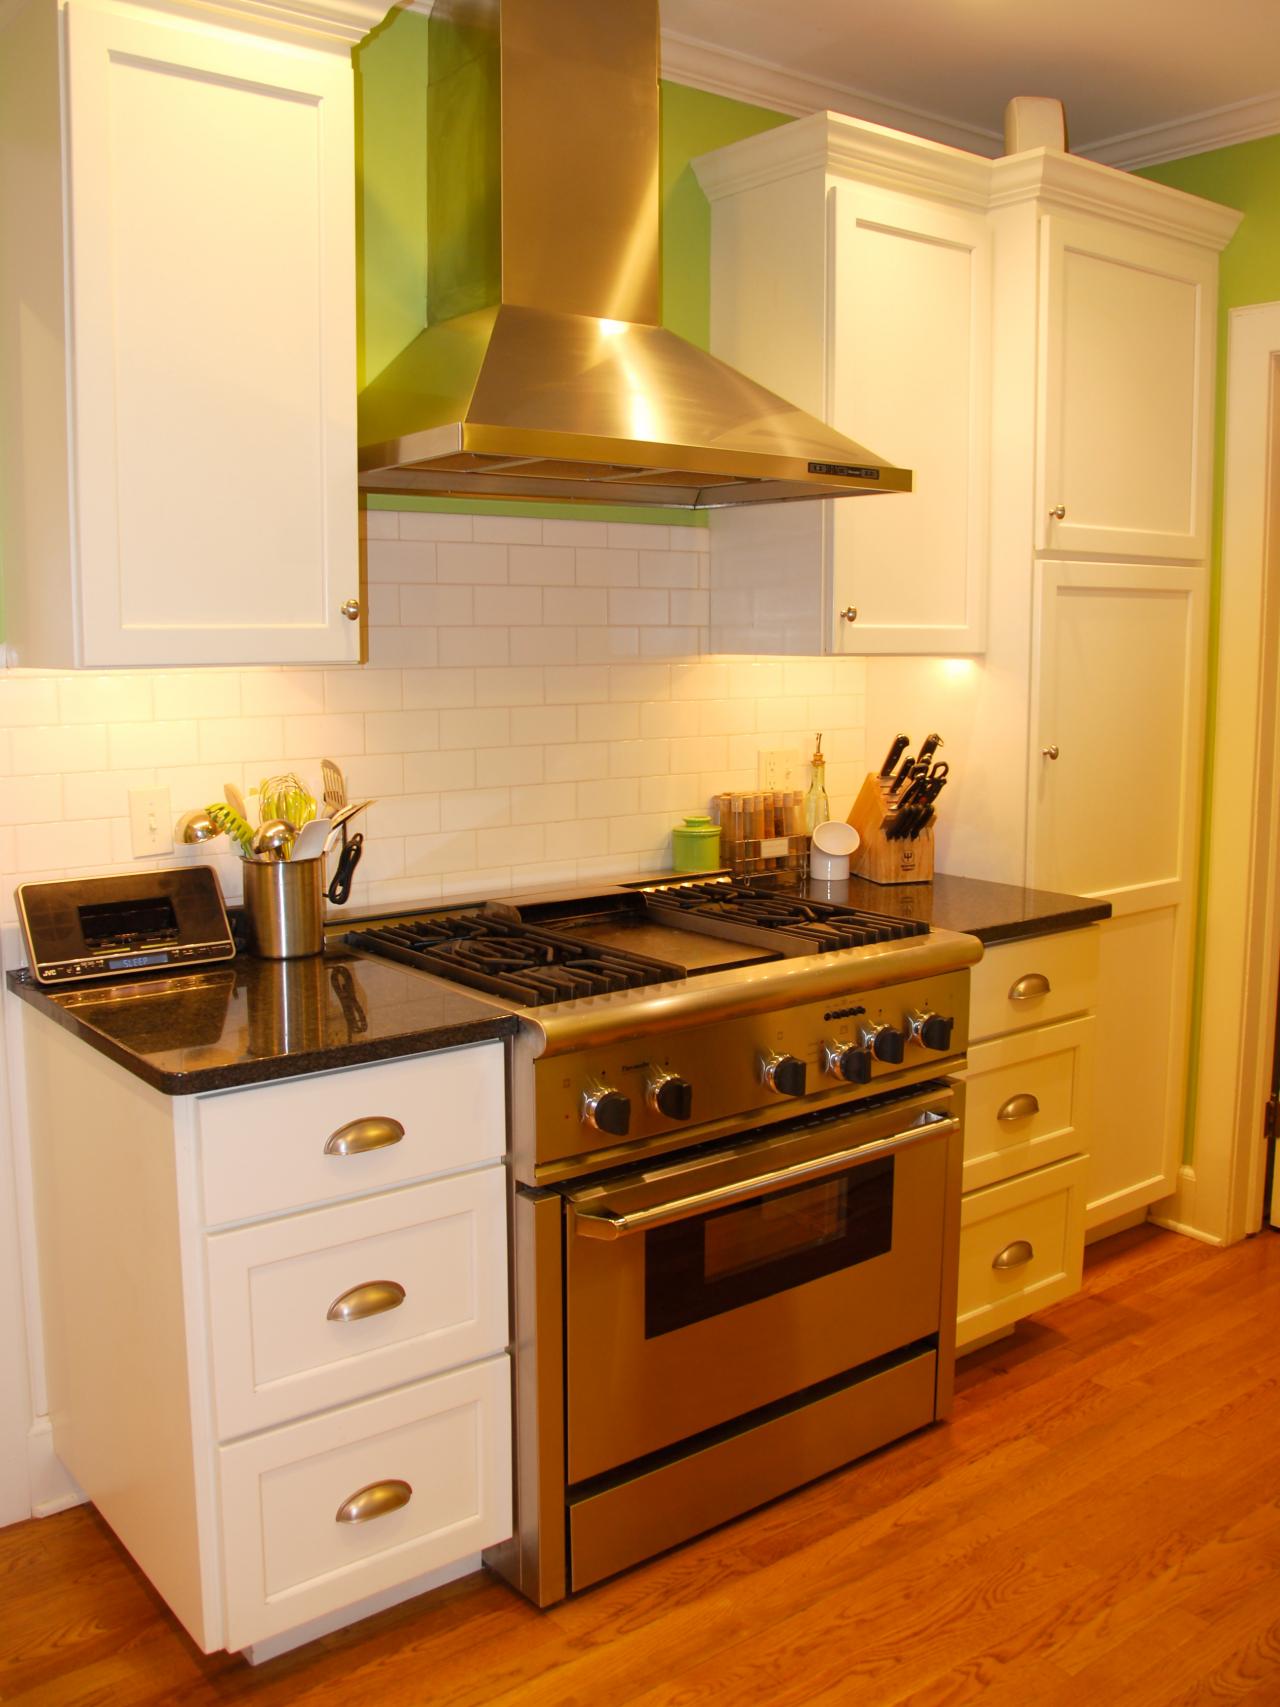 Backsplashes For Small Kitchens Pictures Ideas From HGTV HGTV